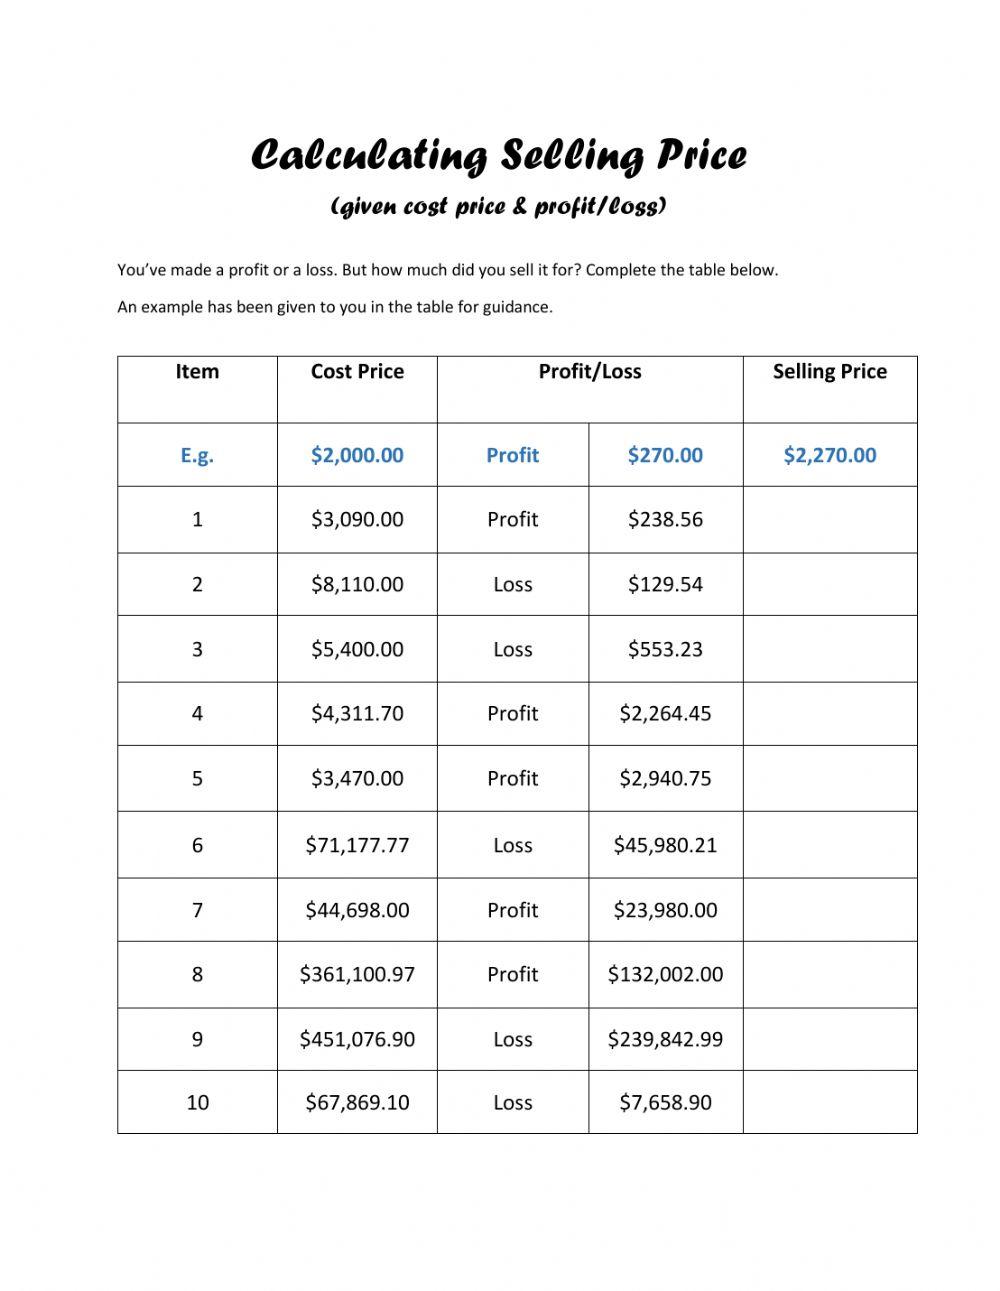 Calculating Selling Price (given C.P. and Profit or Loss)